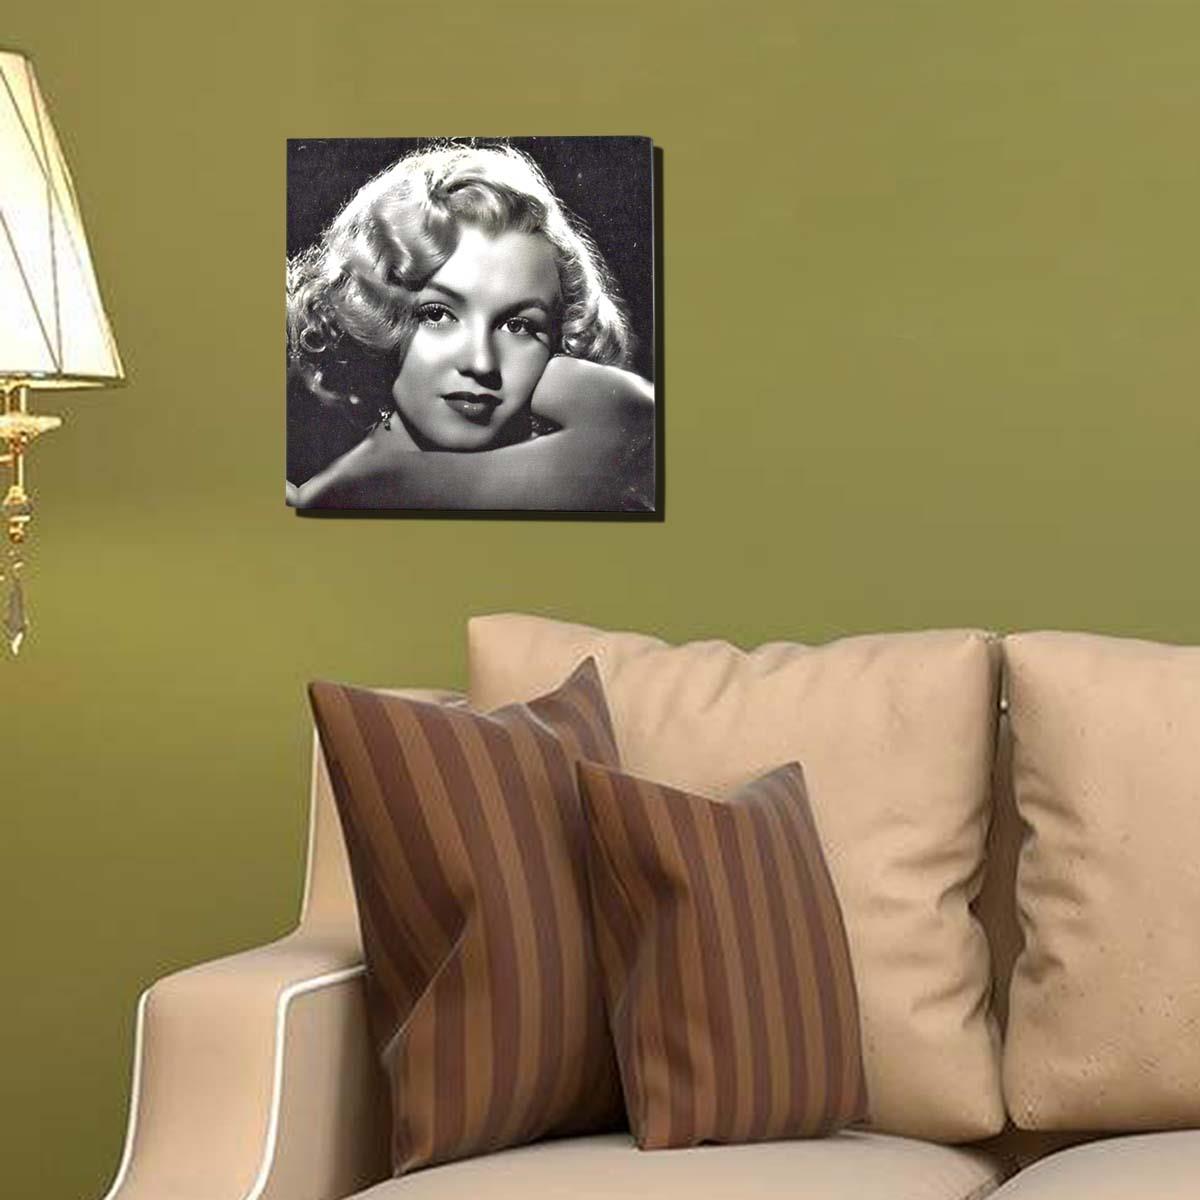 Kookee Canvas Modern Wall , Marilyn Monroe Painting for Home Living Room, Bedroom, Office Decor Ready to Hang (20cmx20cm) (F1-595118-4-A)